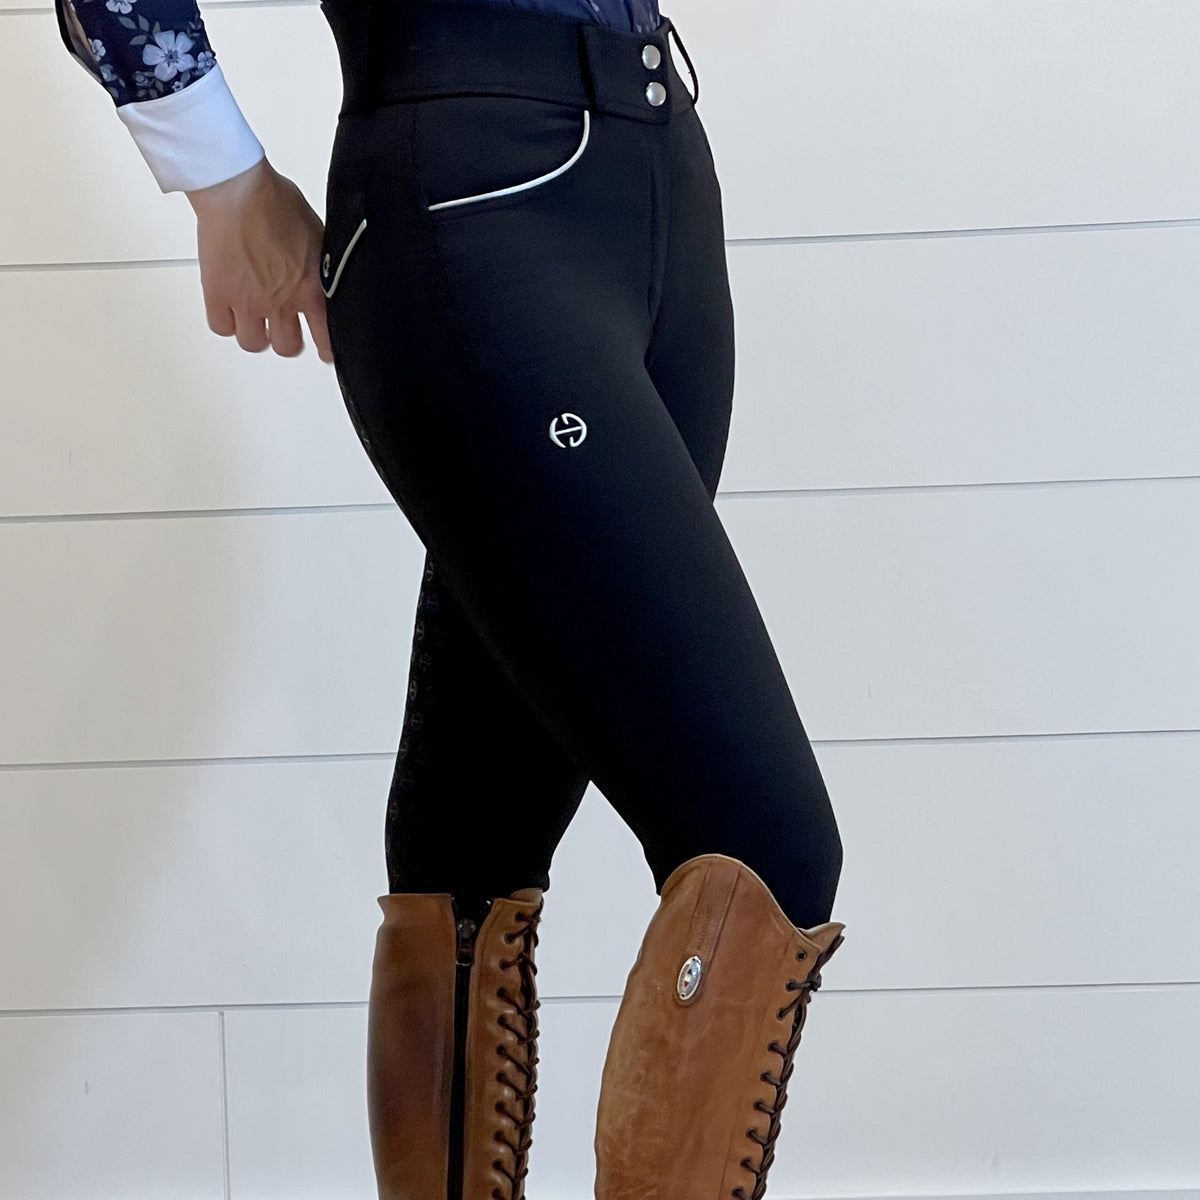 Perfection 2.0 - Black with Silver Piping High Waist Full Seat Breeches